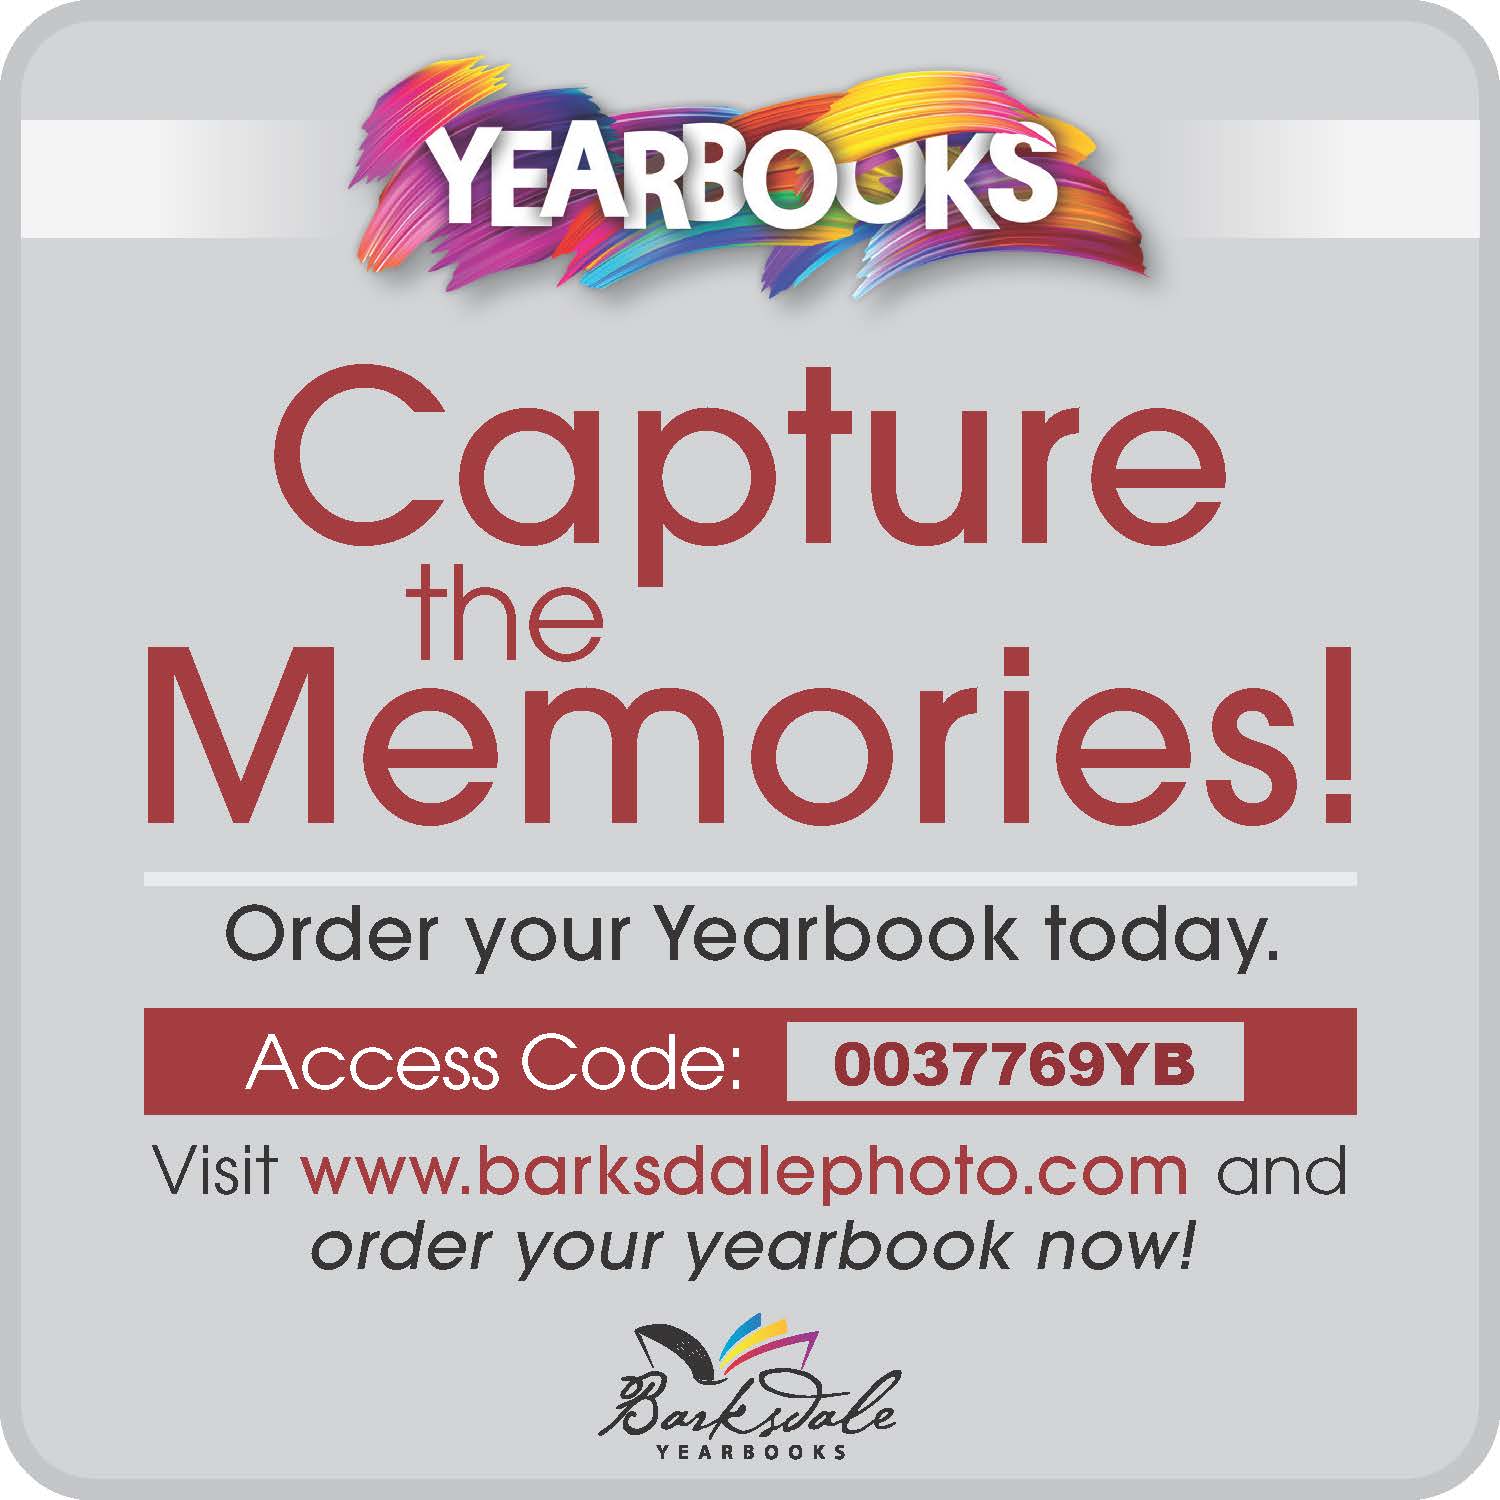 Yearbooks Capture the memories order your yearbook today access code 0037769yb visit www.barksdalephoto.com and order your yearbook now